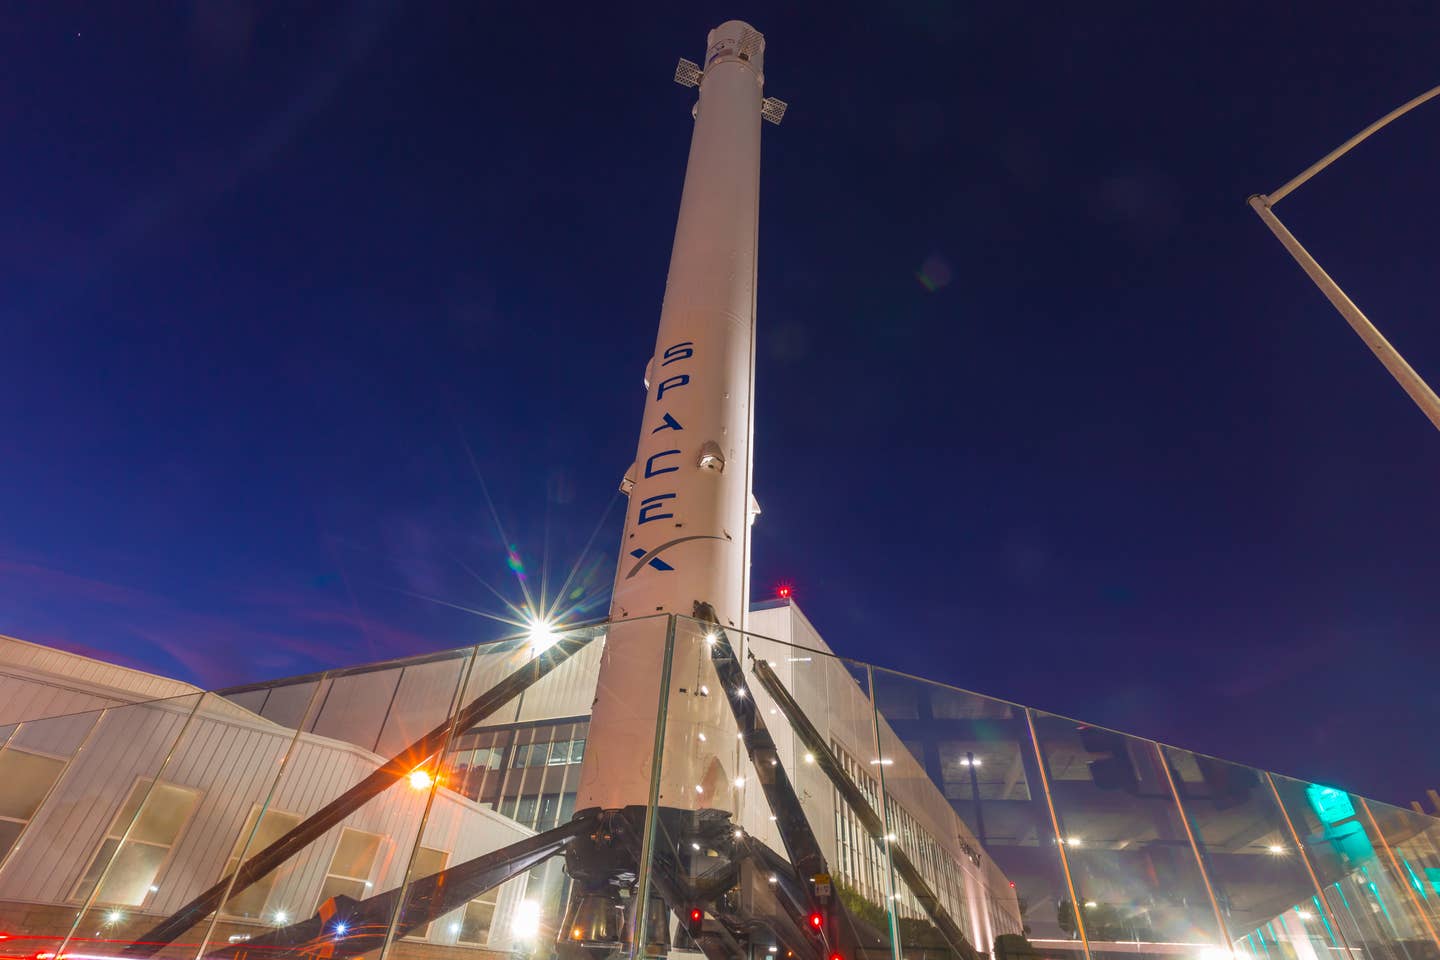 SpaceX Headquarters in Hawthorne California as a long exposure shot